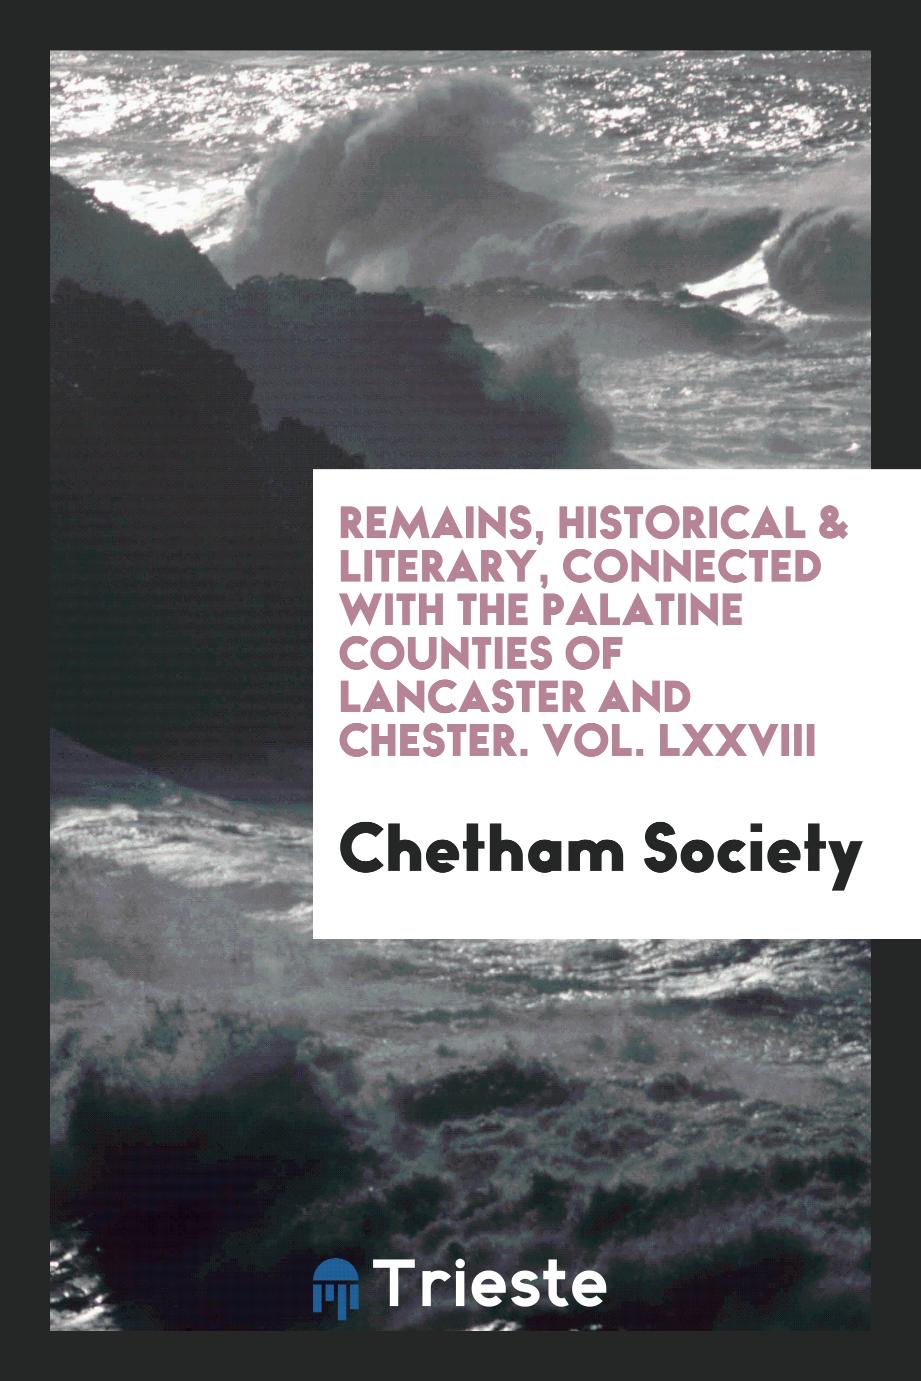 Remains, Historical & Literary, Connected with the Palatine Counties of Lancaster and Chester. Vol. LXXVIII